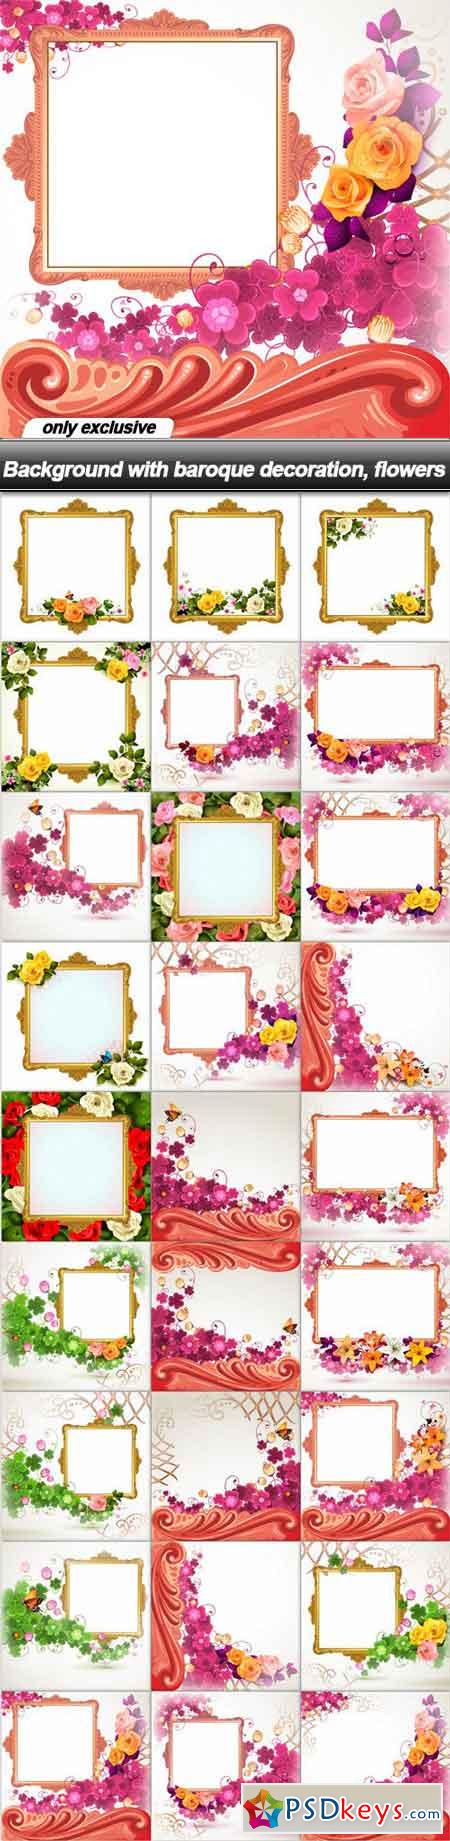 Background with baroque decoration, flowers - 27 EPS